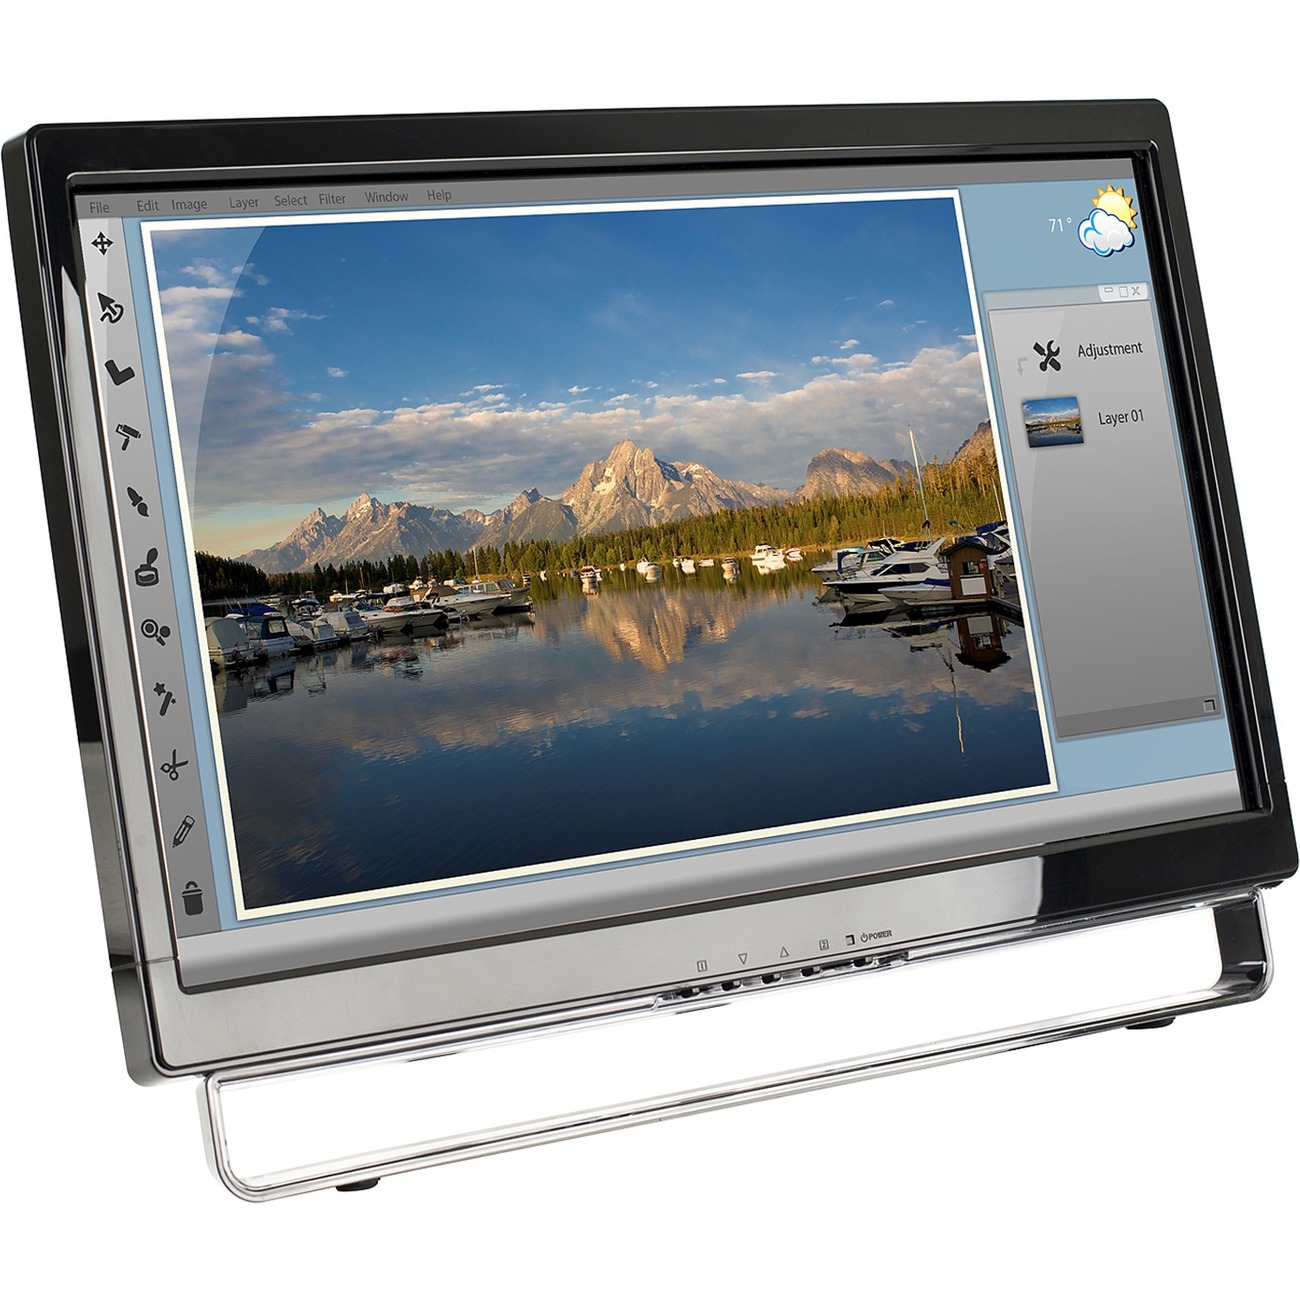 Planar PXL2230MW 22" LCD Touchscreen Monitor - 16:9 - 5 ms_subImage_1